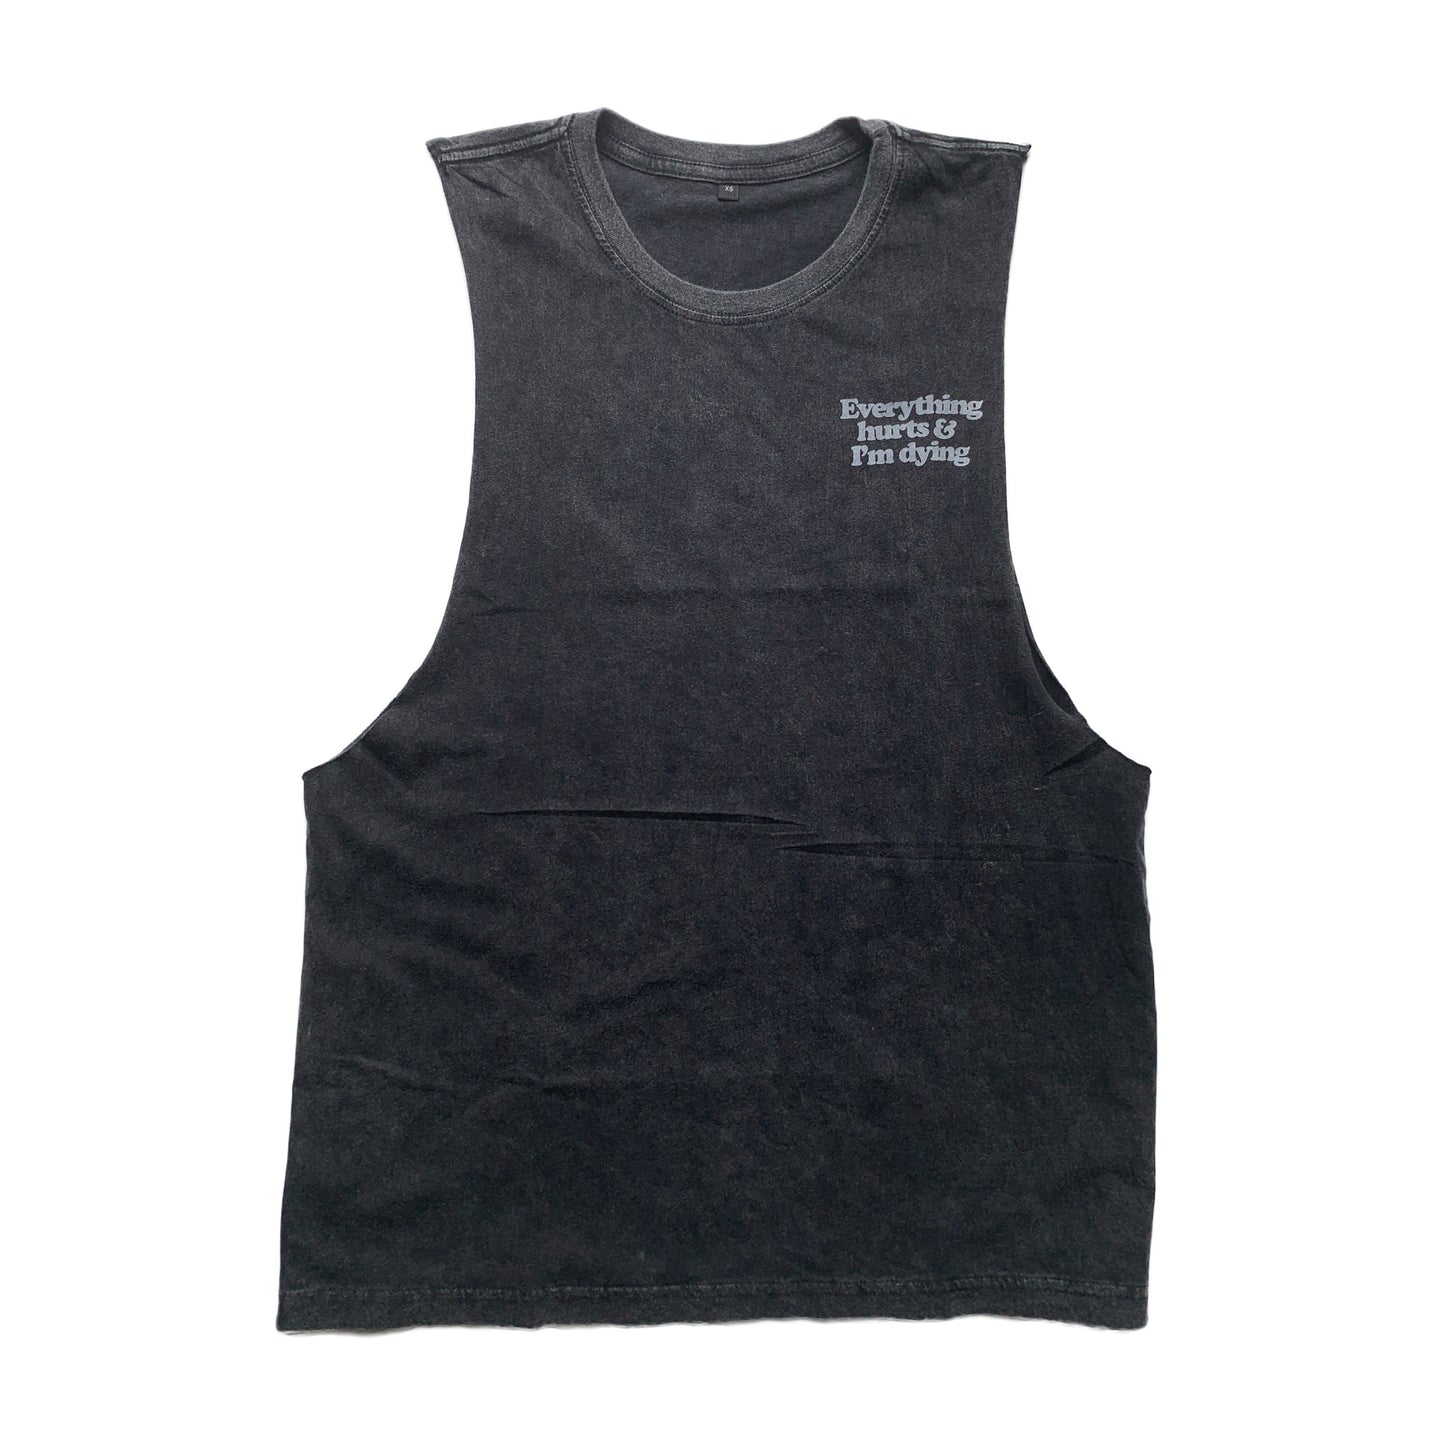 Everything hurts muscle tank